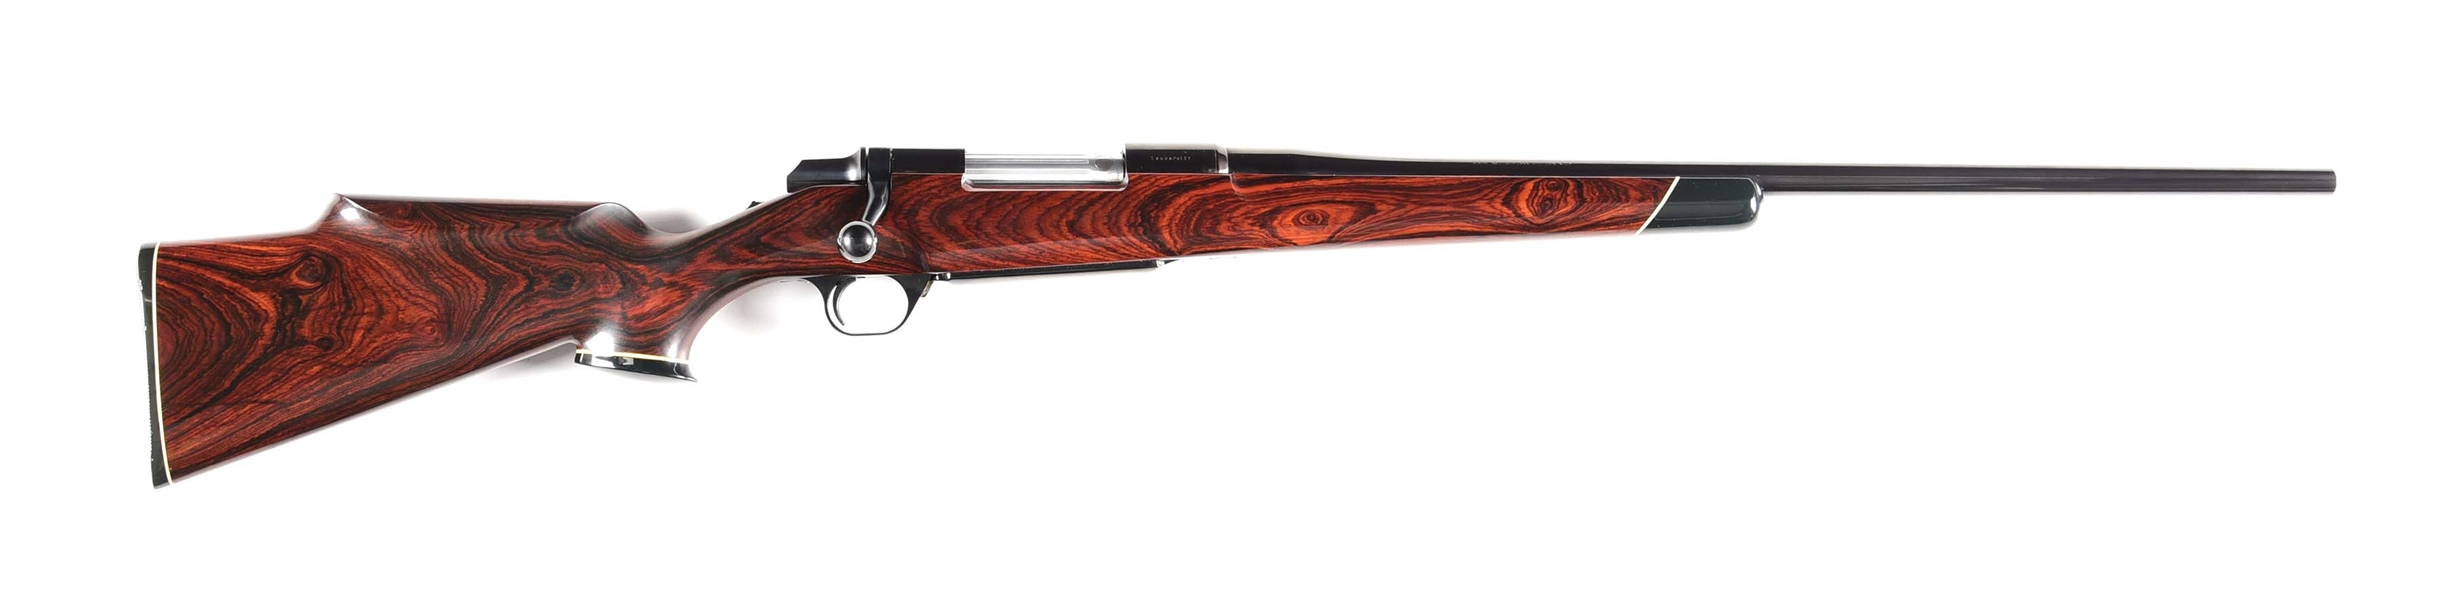 (M) COCO BOLO STOCKED BROWNING BBR BOLT ACTION RIFLE.